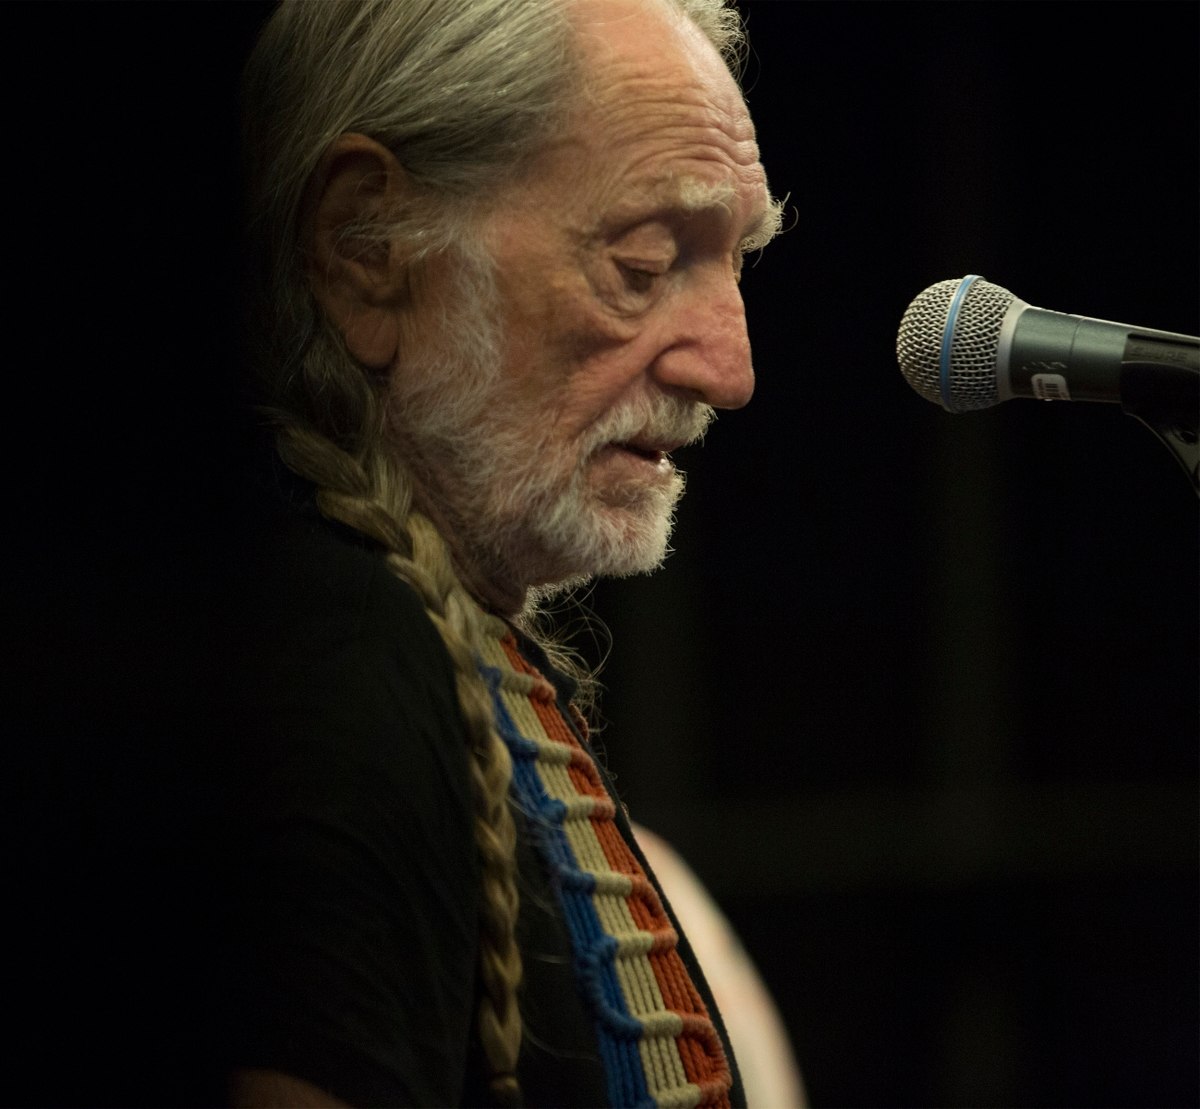 Willie Nelson rescued 70 horses from the slaughterhouse, now looks after them at his Texas farm